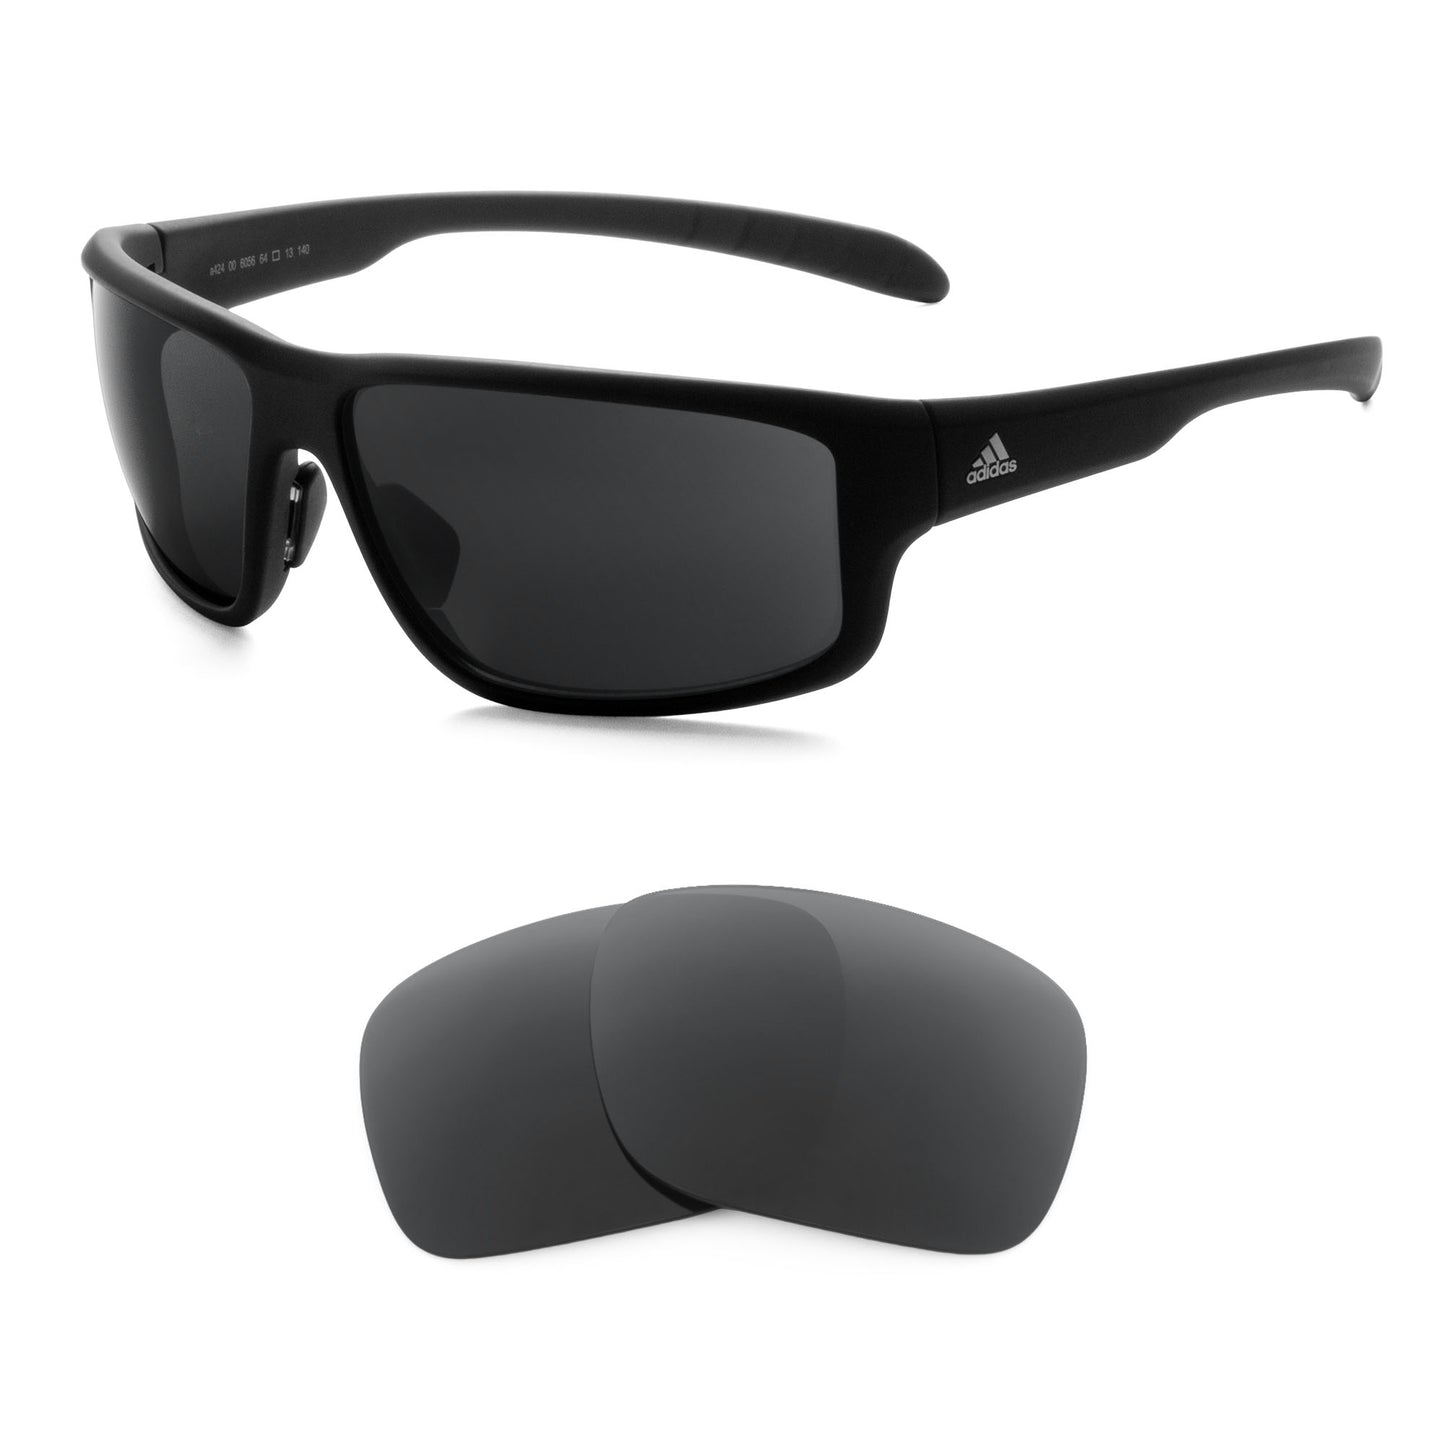 Adidas Kumacross 2.0 sunglasses with replacement lenses